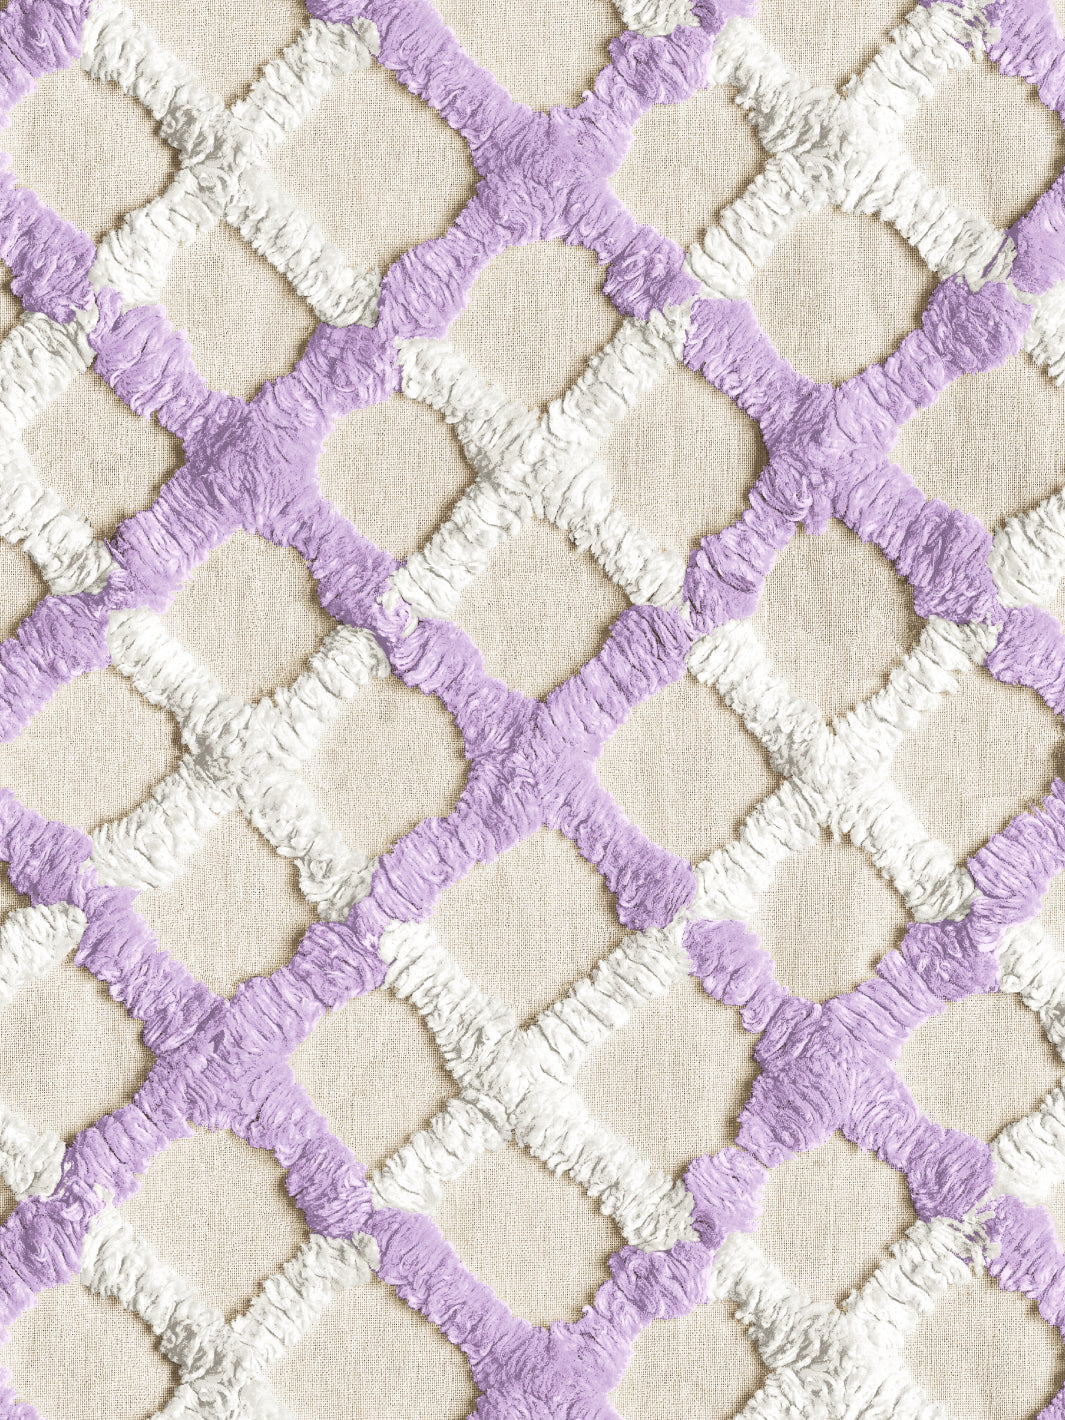 'Chenille Quilt' Wallpaper by Chris Benz - Lilac